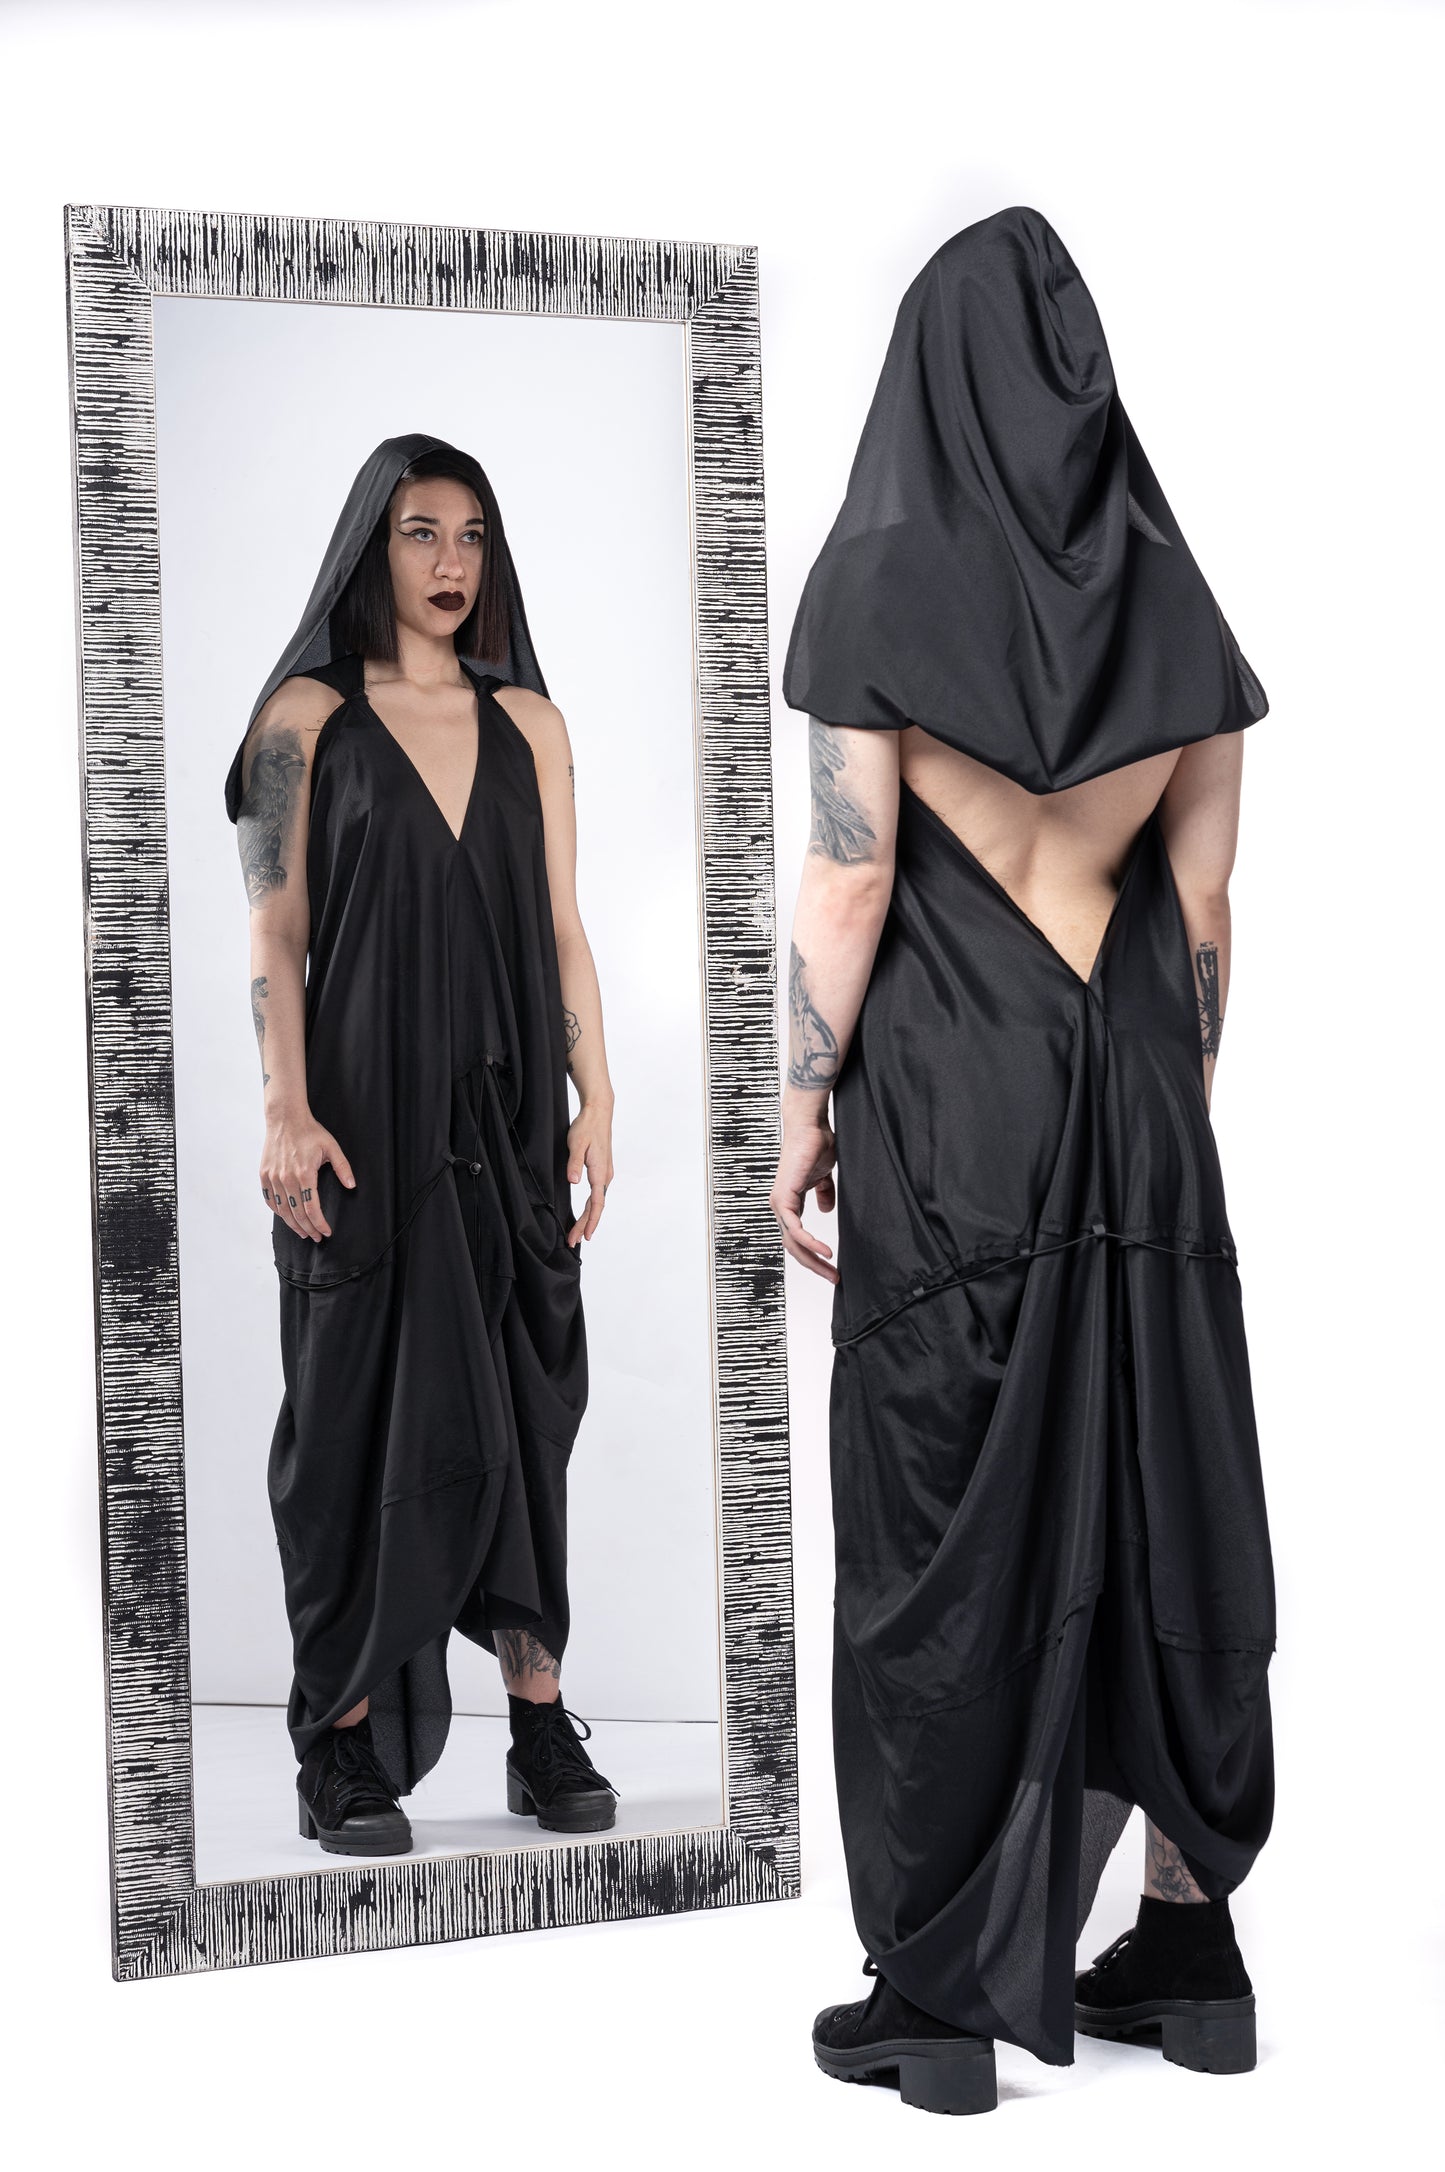 SOMBRA Hooded Transformable Dress